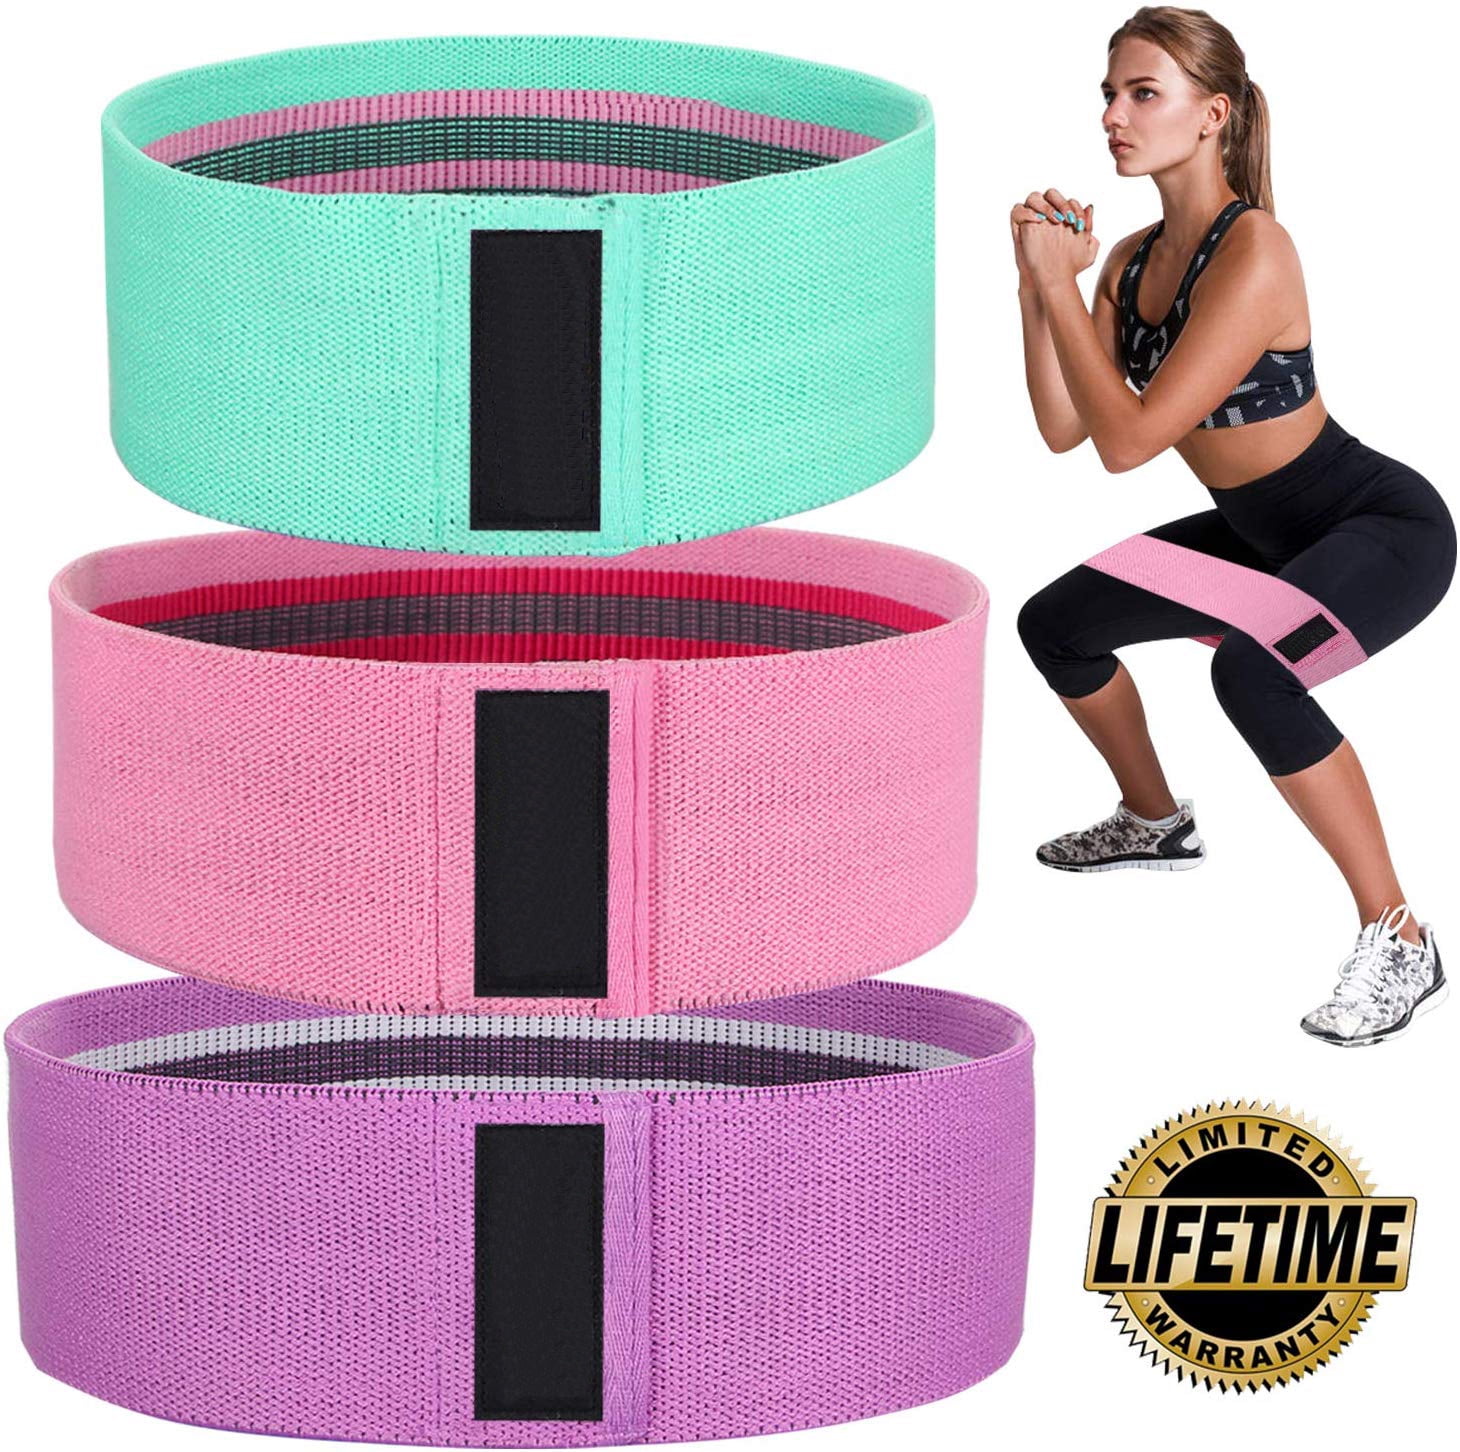 Women Men Fabric Resistance Bands Hip Circle Glutes Booty Butt Exercise Loop Set 